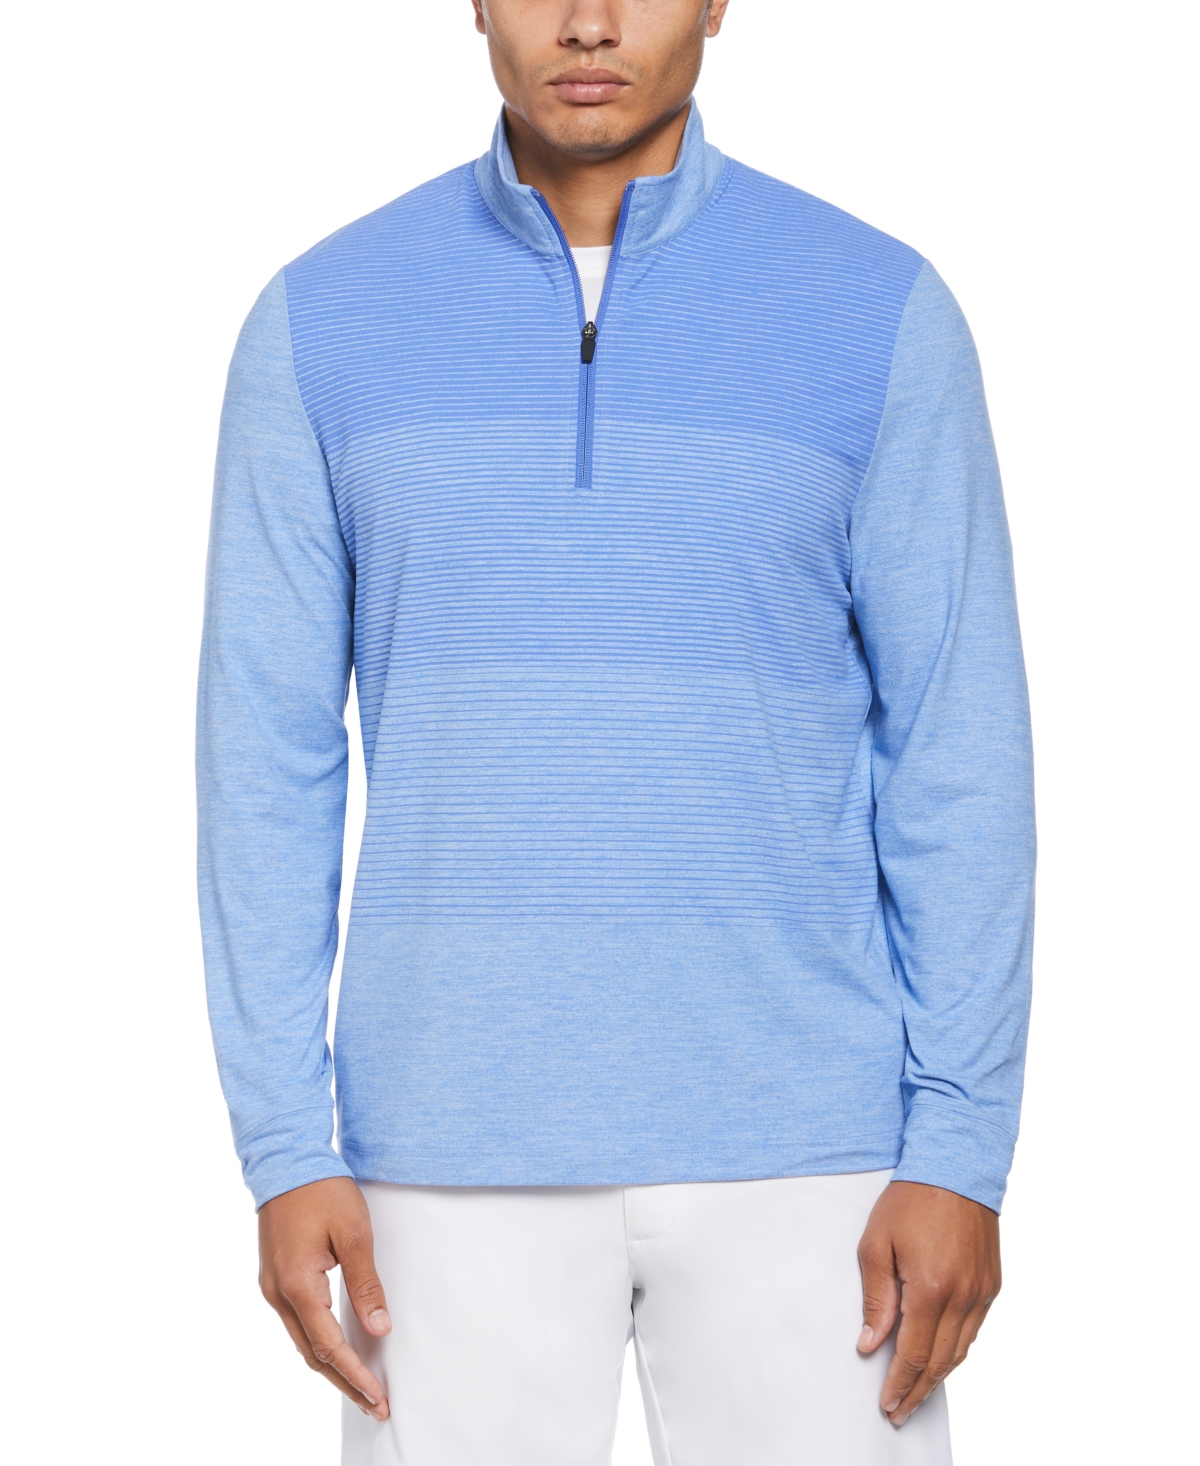 Men's Lux Touch Ombre Golf Sweater - Peacoat Heather